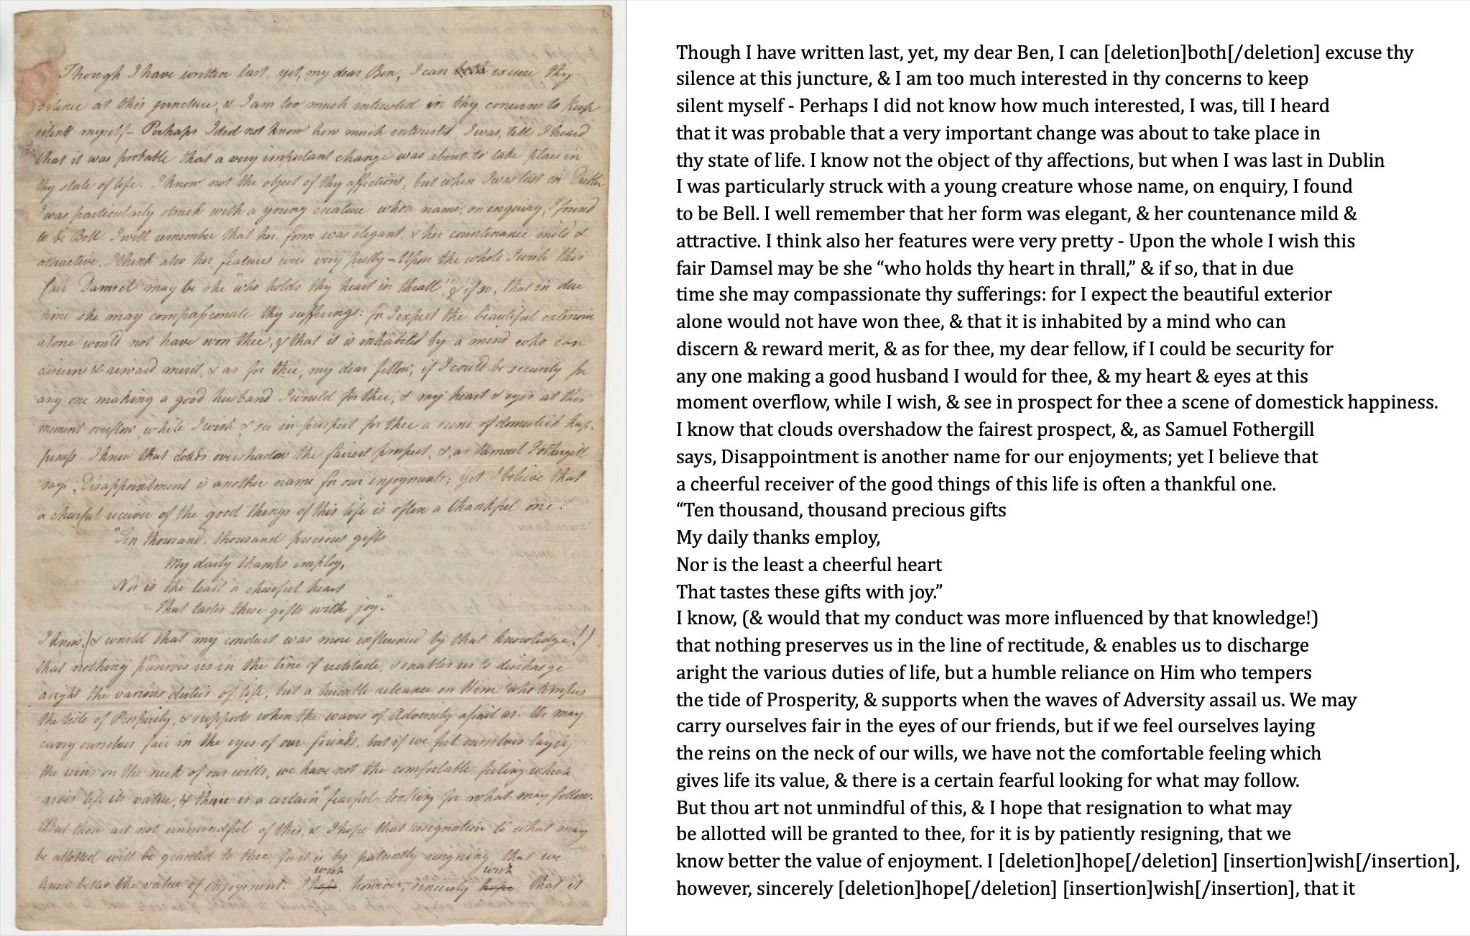 A side by side image, on the left is a manuscript letter from Mary Leadbeater, and on the right a digital transcription of that letter